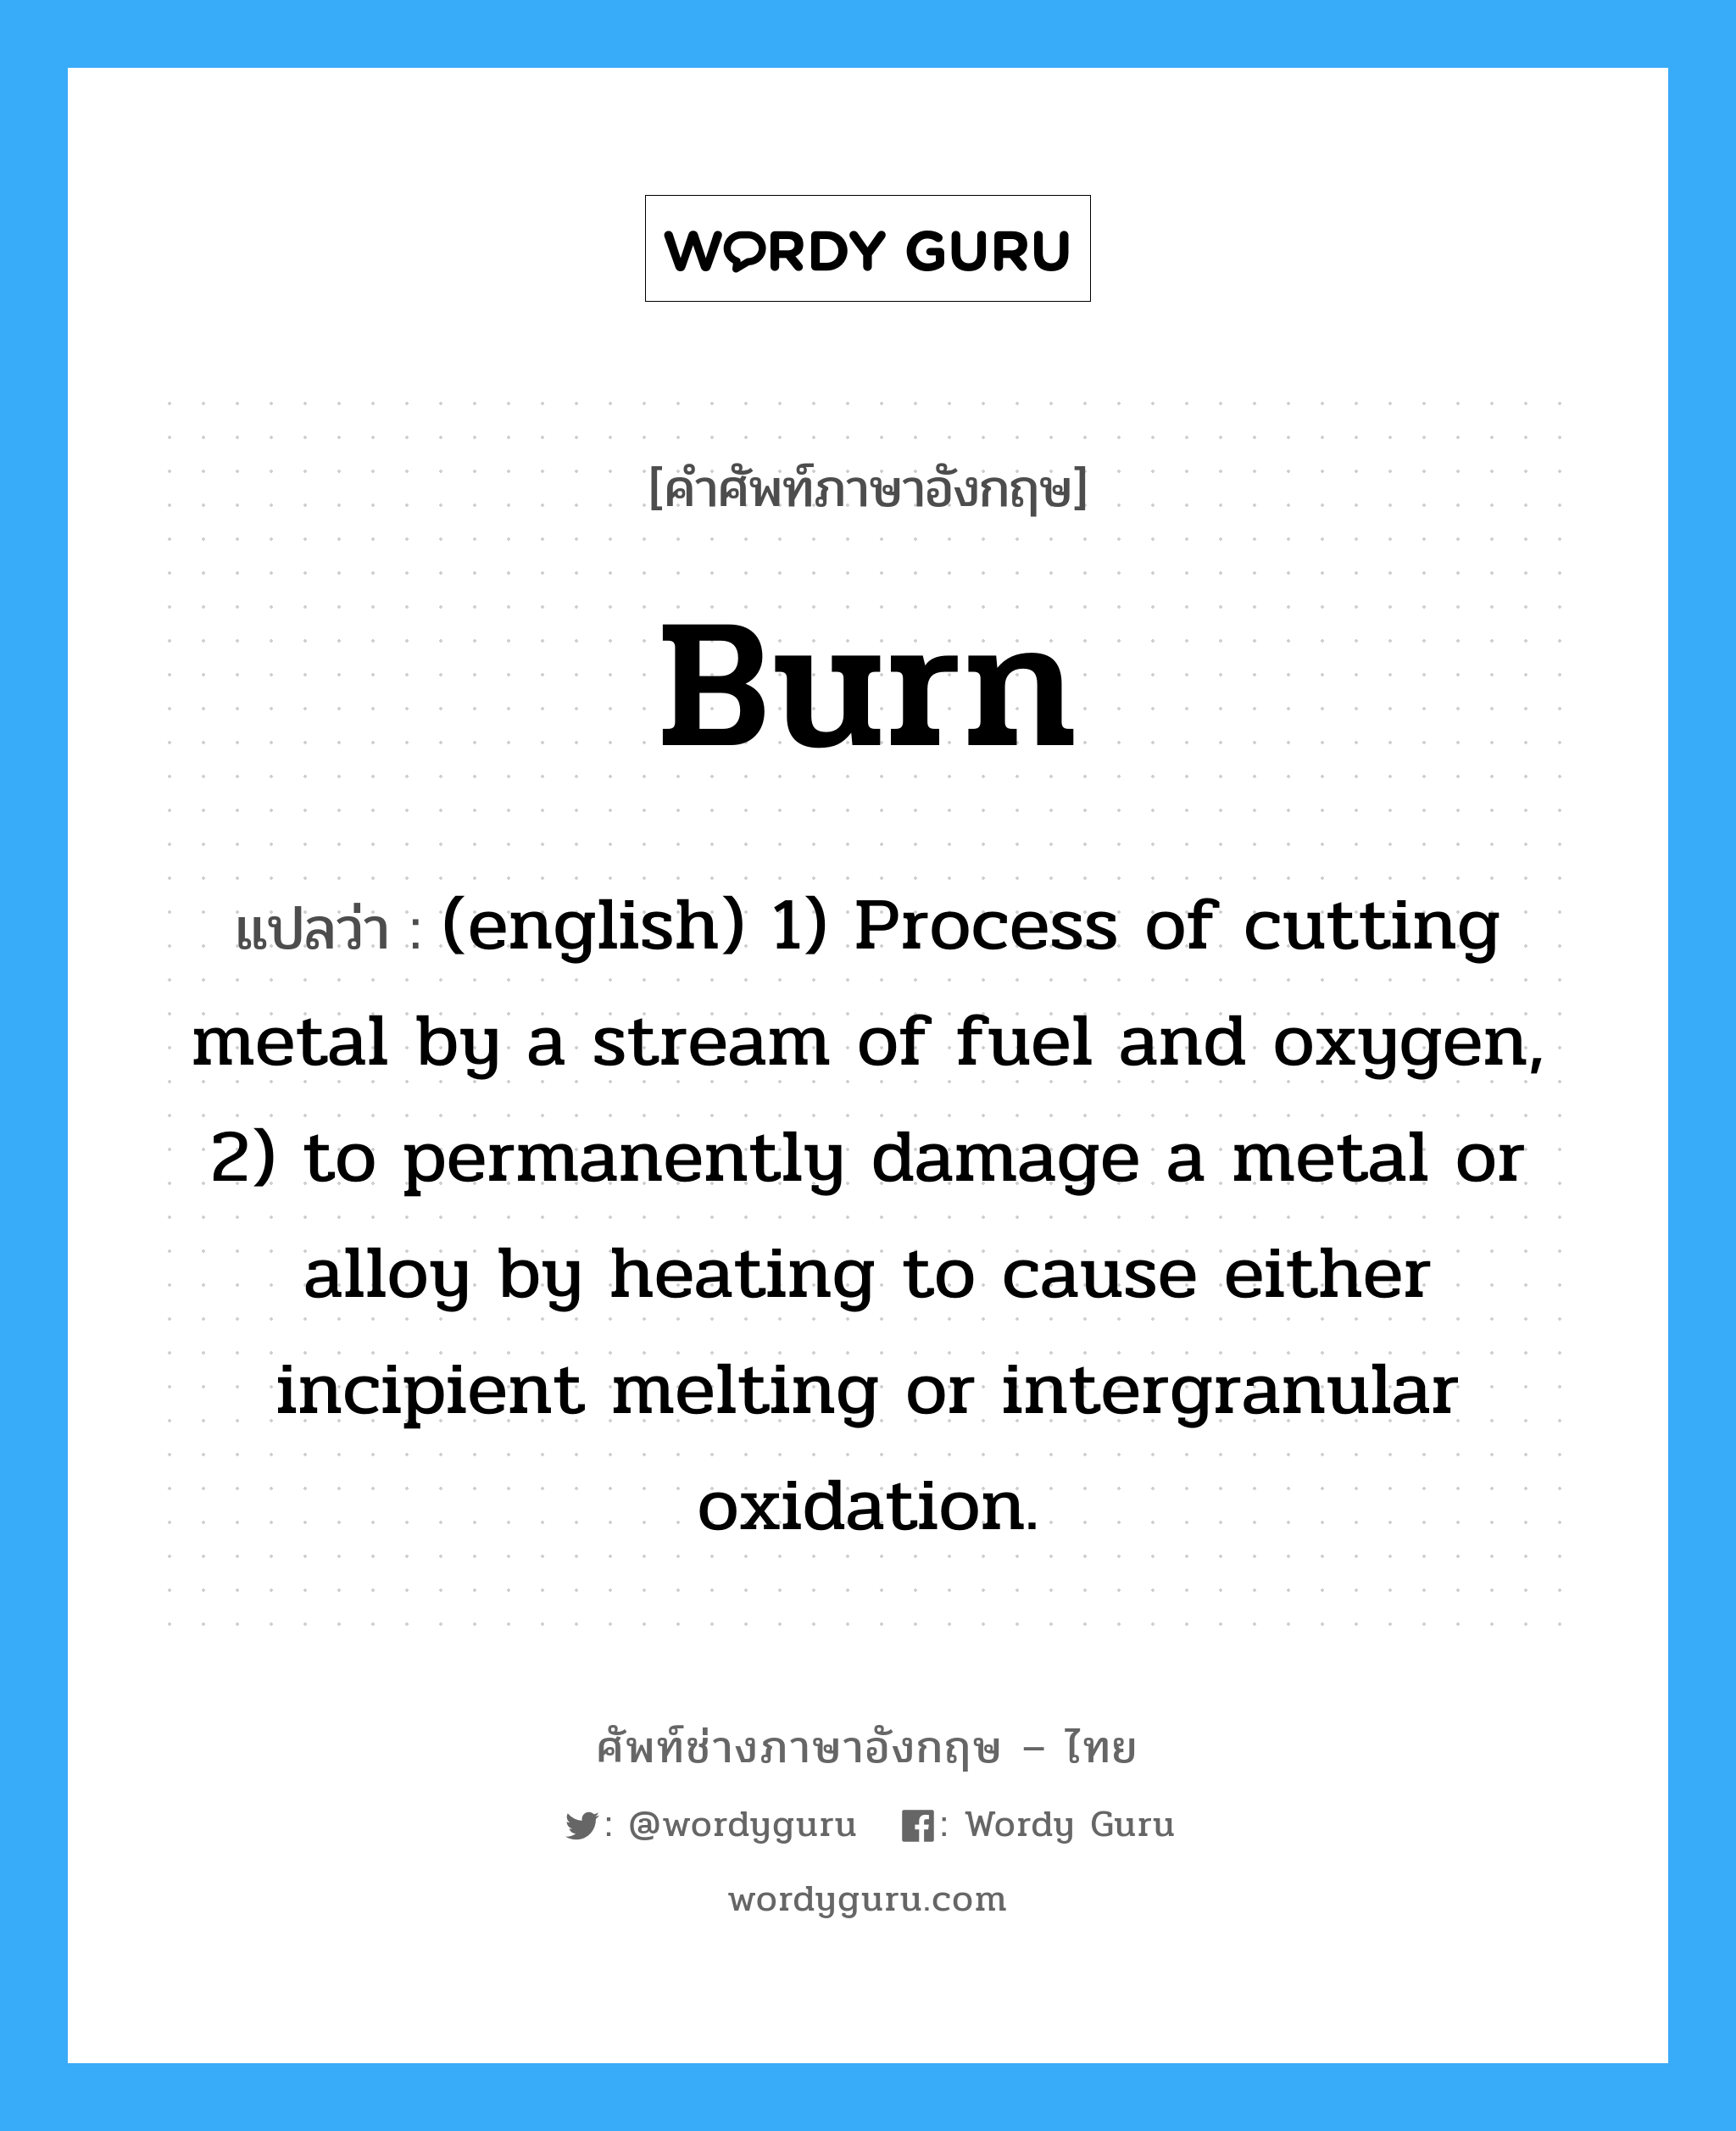 Burn แปลว่า?, คำศัพท์ช่างภาษาอังกฤษ - ไทย Burn คำศัพท์ภาษาอังกฤษ Burn แปลว่า (english) 1) Process of cutting metal by a stream of fuel and oxygen, 2) to permanently damage a metal or alloy by heating to cause either incipient melting or intergranular oxidation.